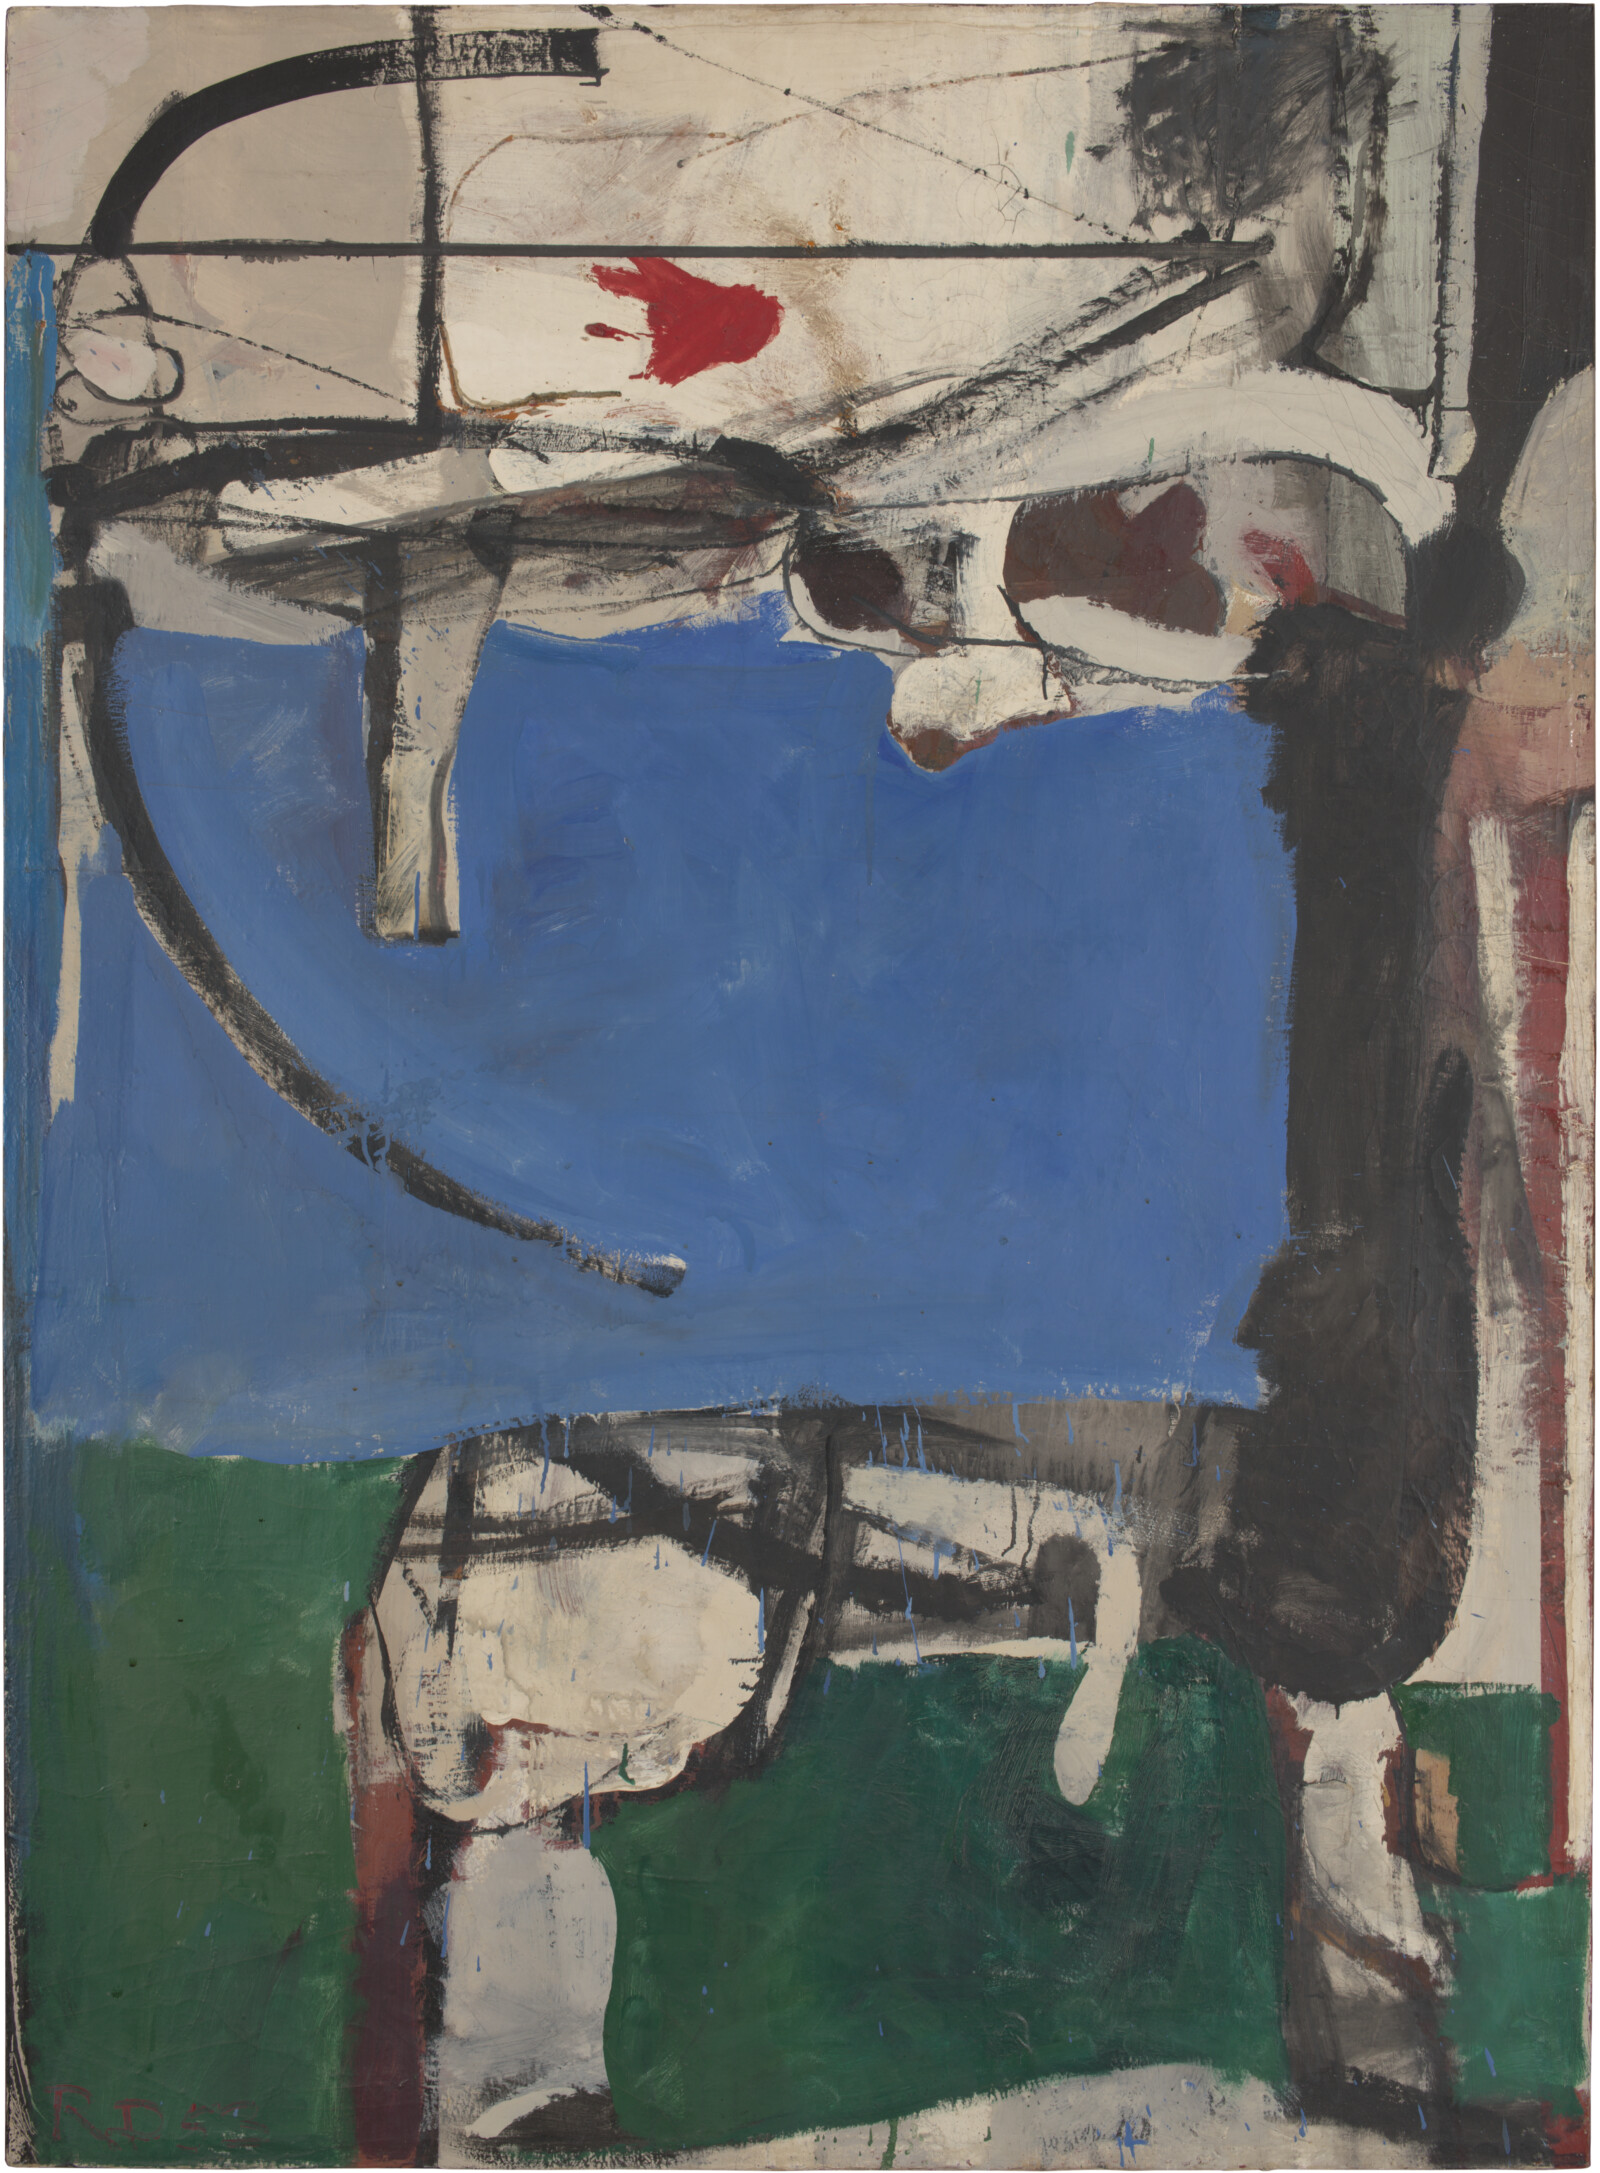 Richard Diebenkorn: Early Abstract Works, 1948–1955